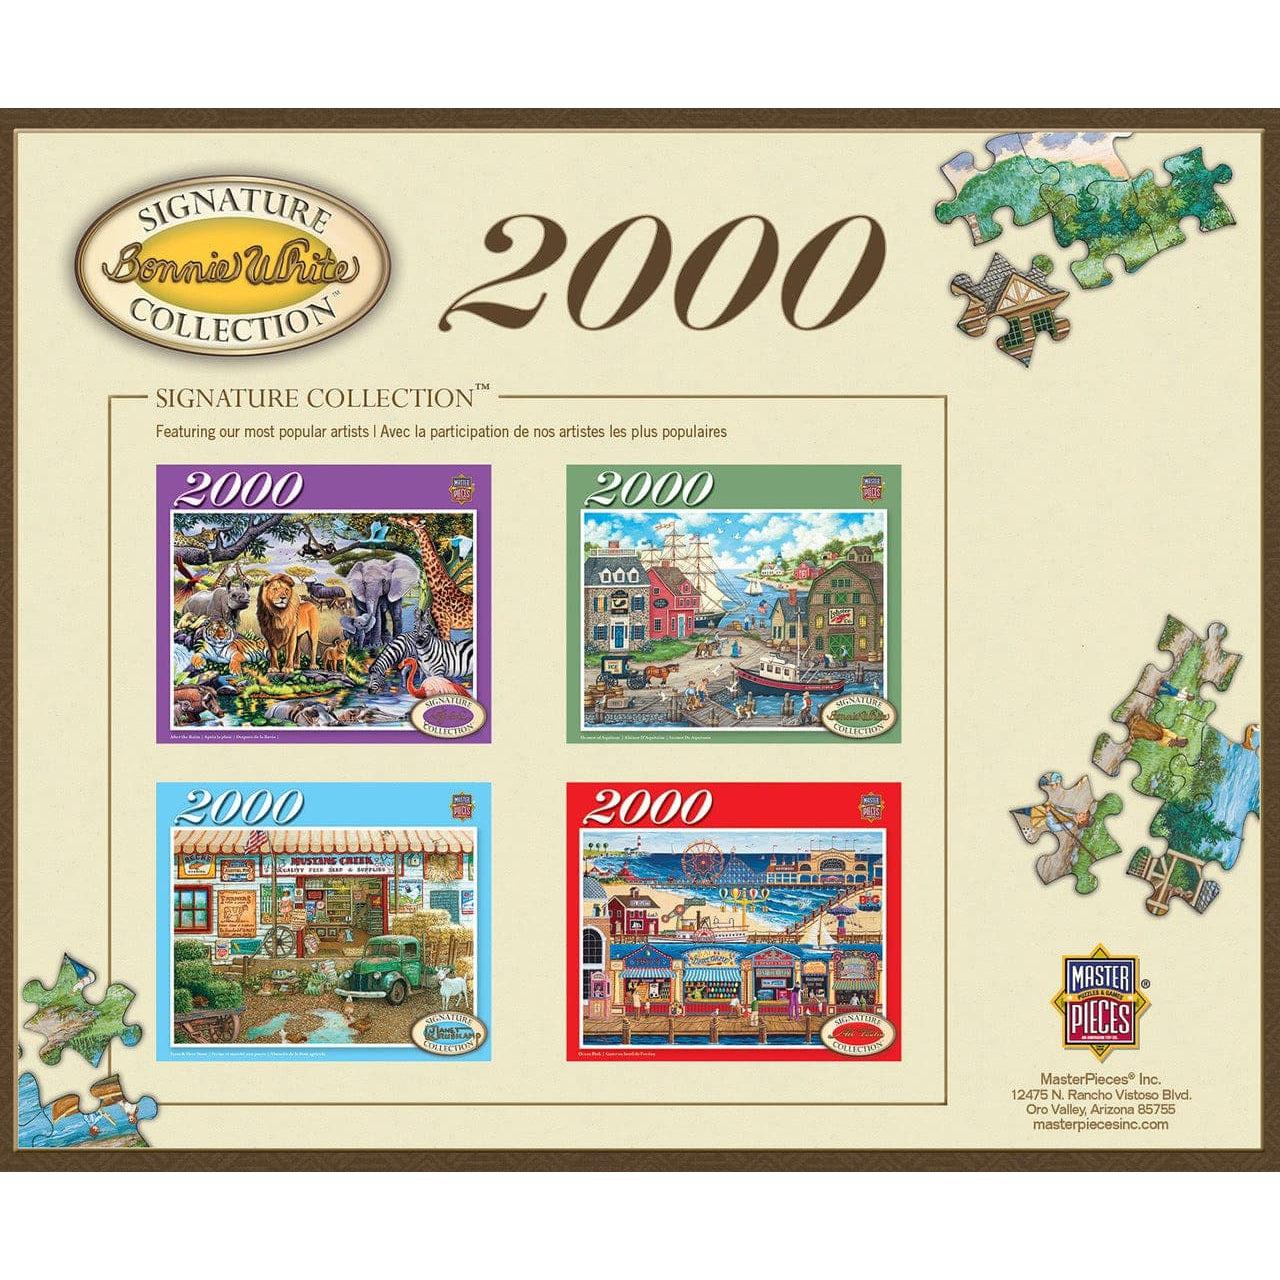 MasterPieces-Signature Collection - Adirondack Anglers - 2000 Piece Puzzle-71968-Legacy Toys